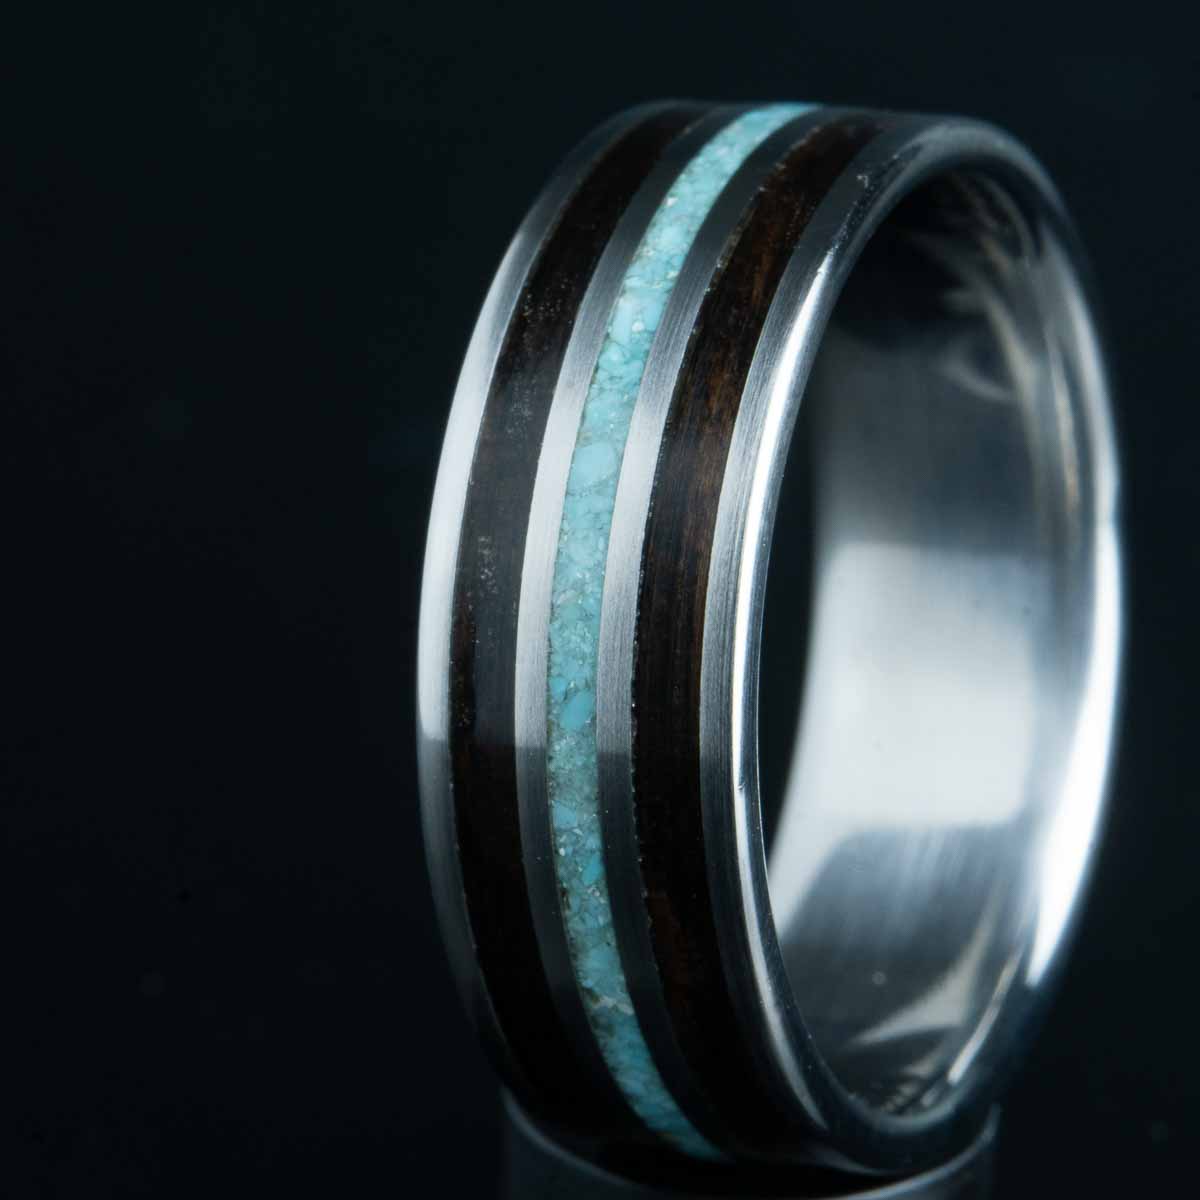 Turquoise ring with ebony wood inlay by Peacefield Titanium